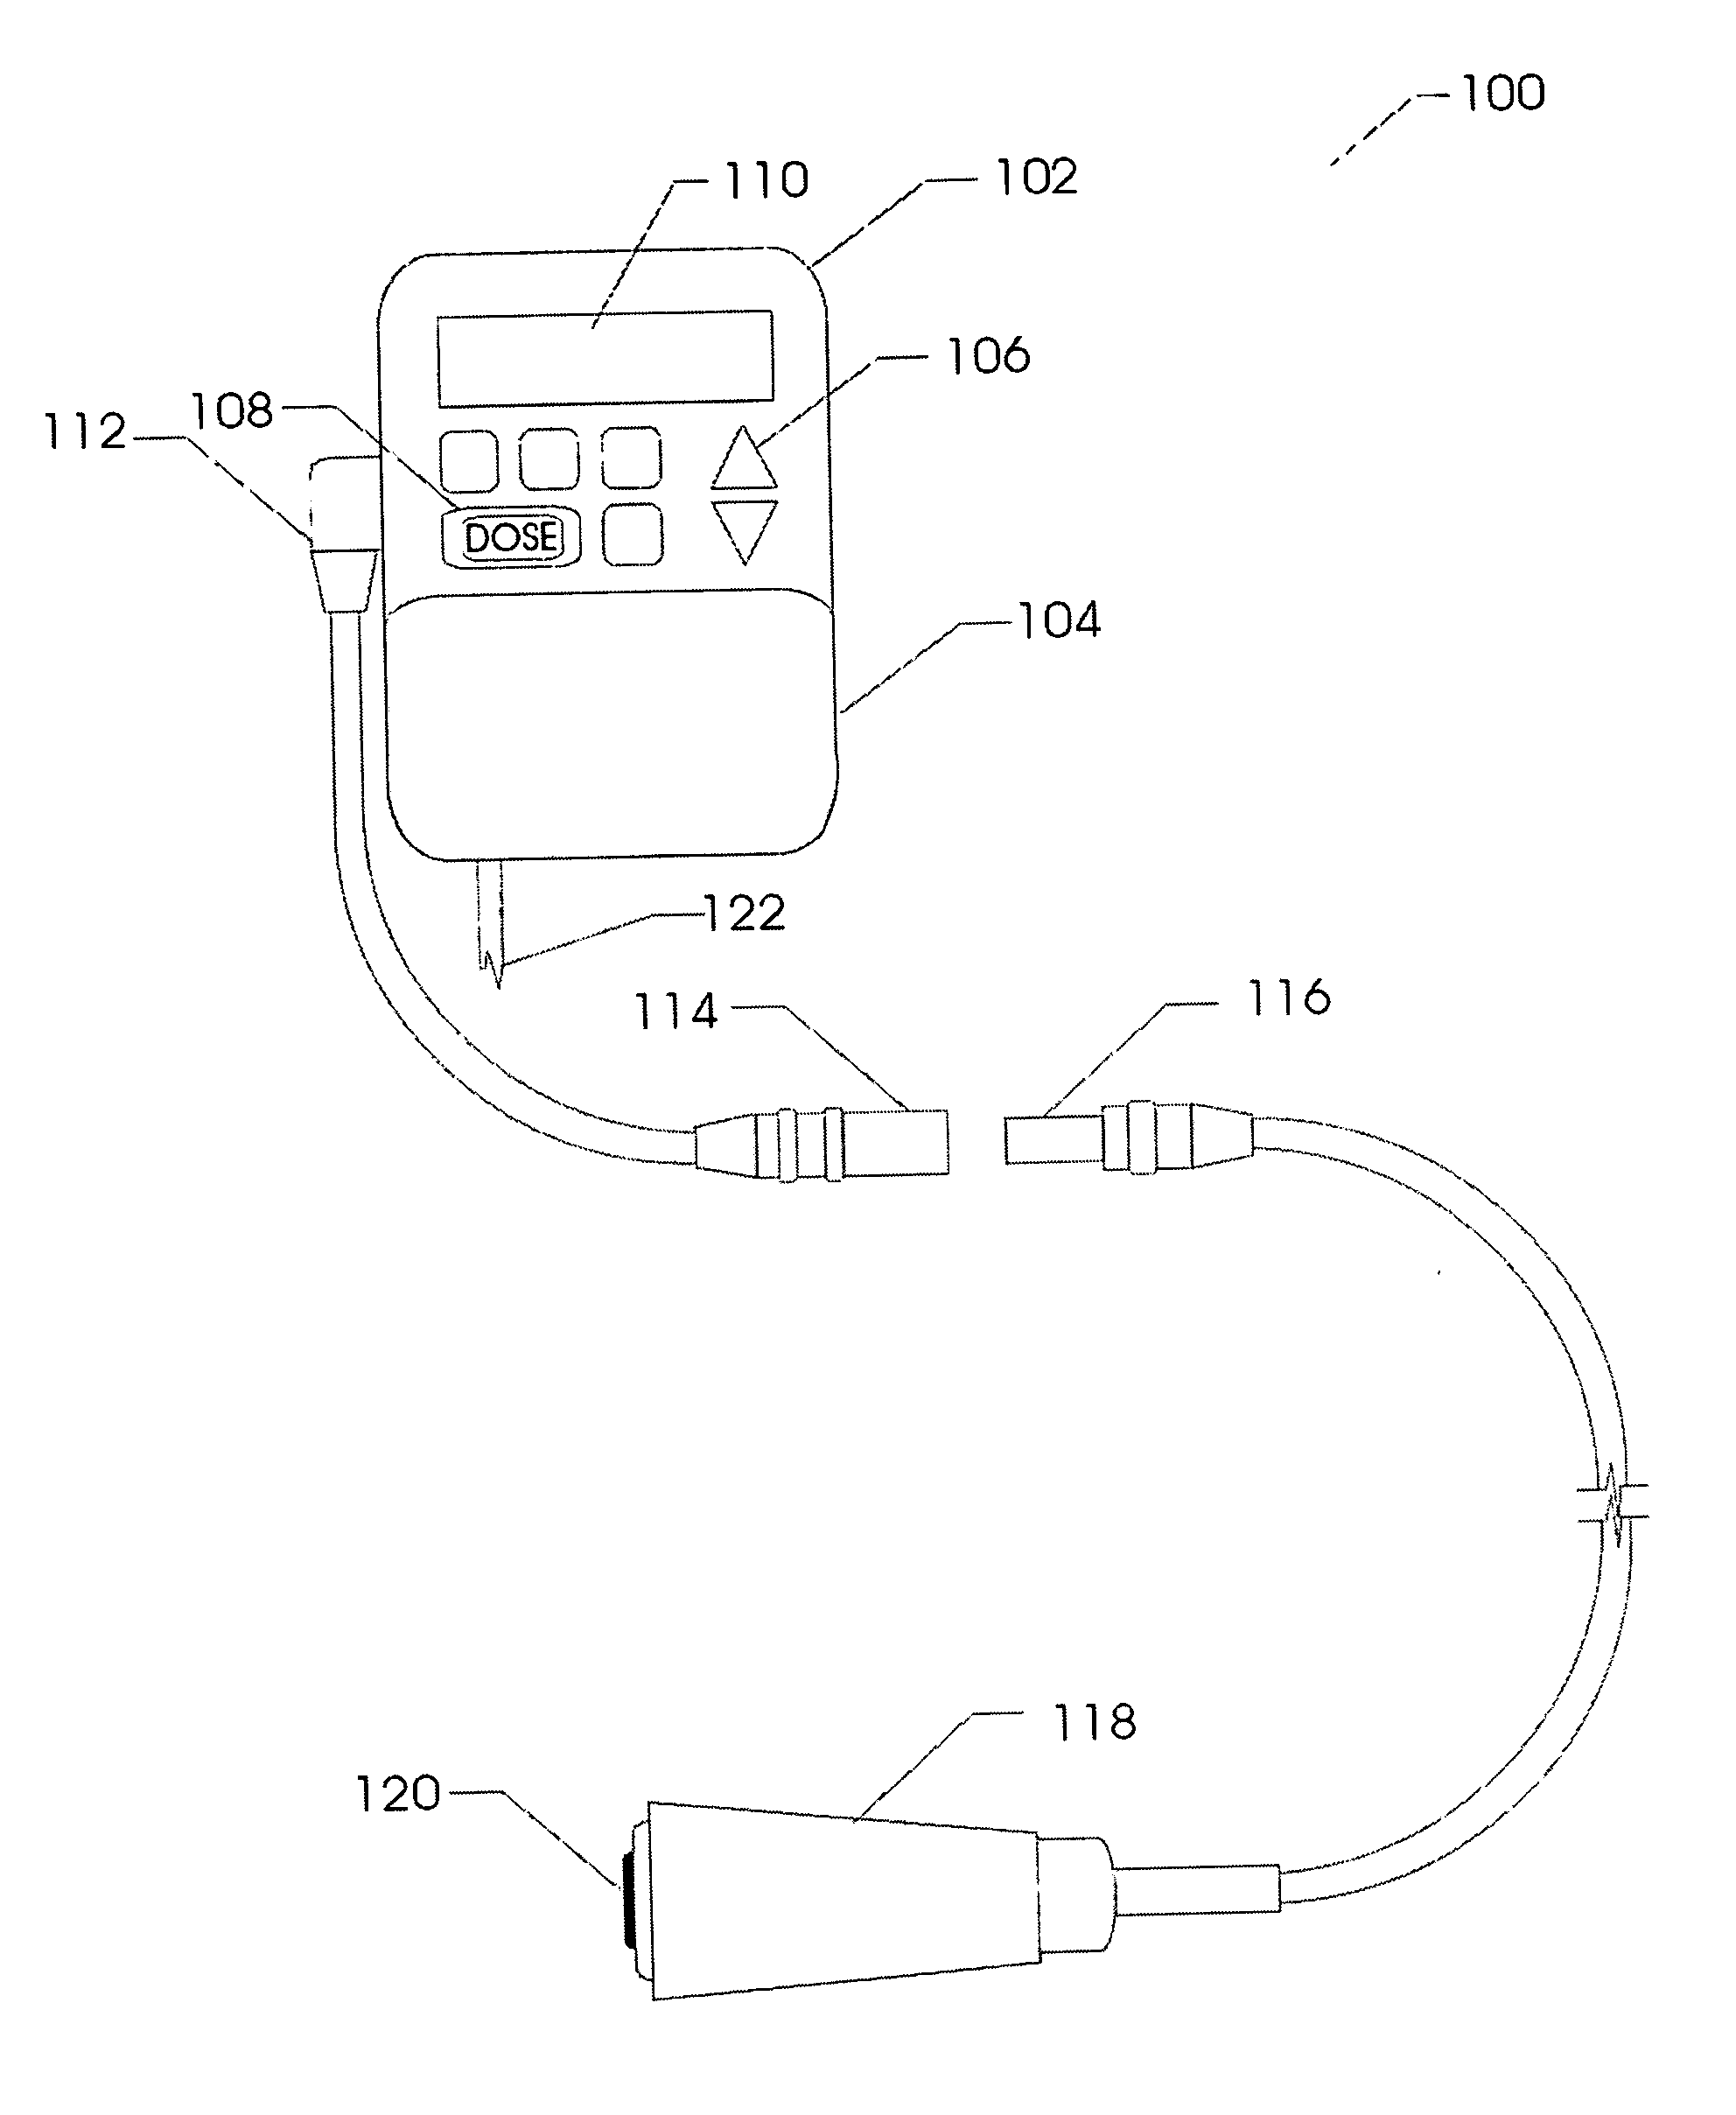 Medication security apparatus and method